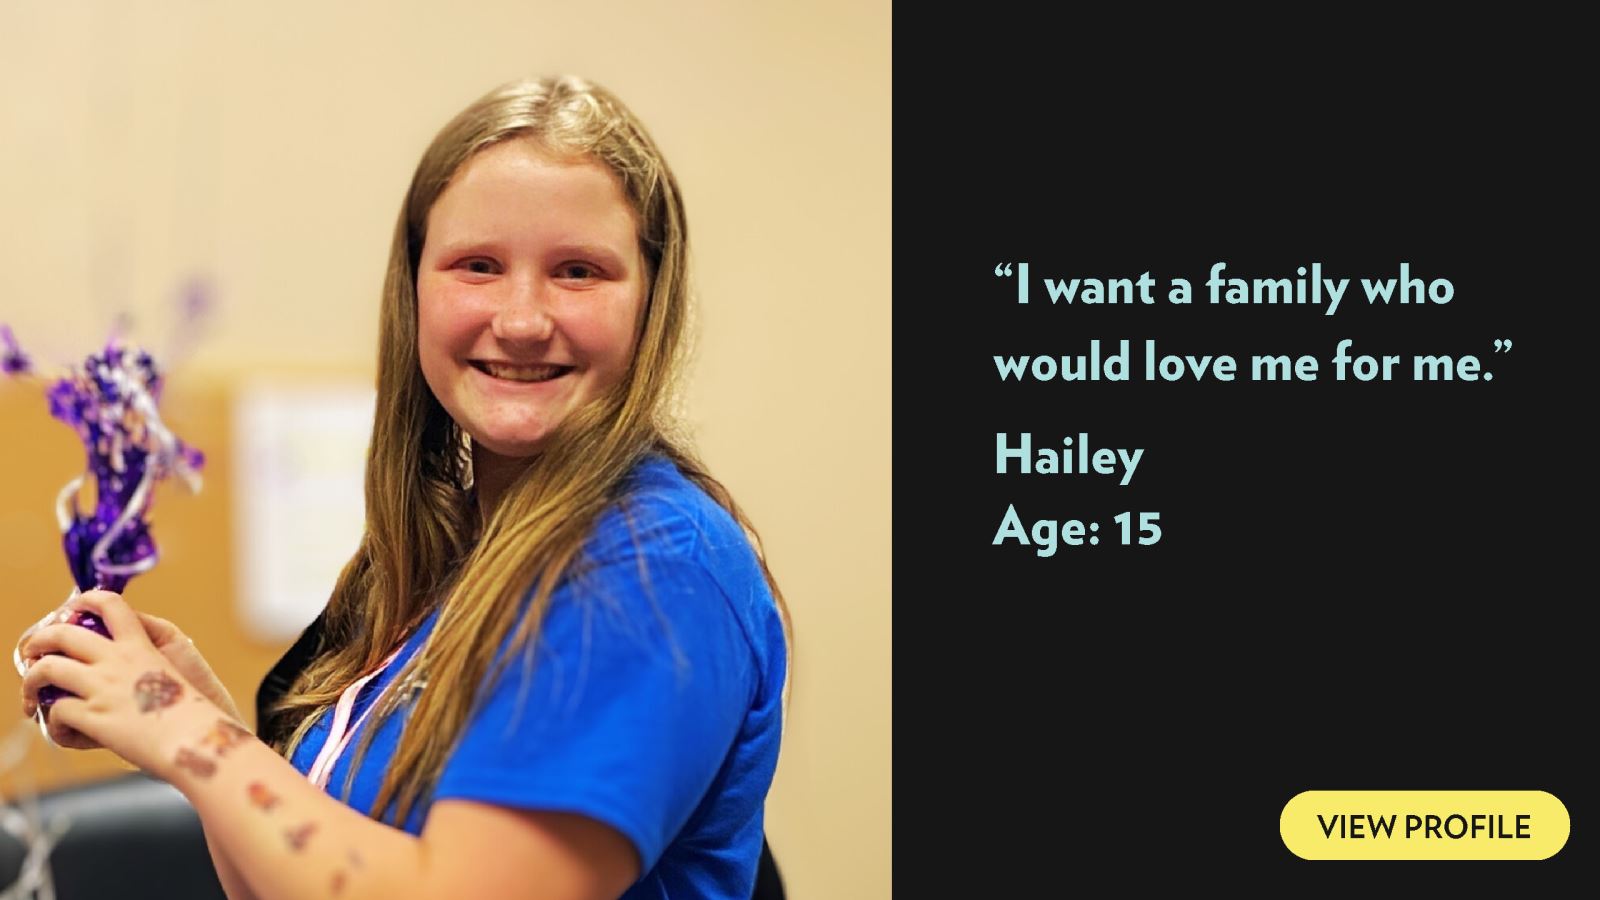 I want a family who would love me for me. Hailey, age 15. View profile.